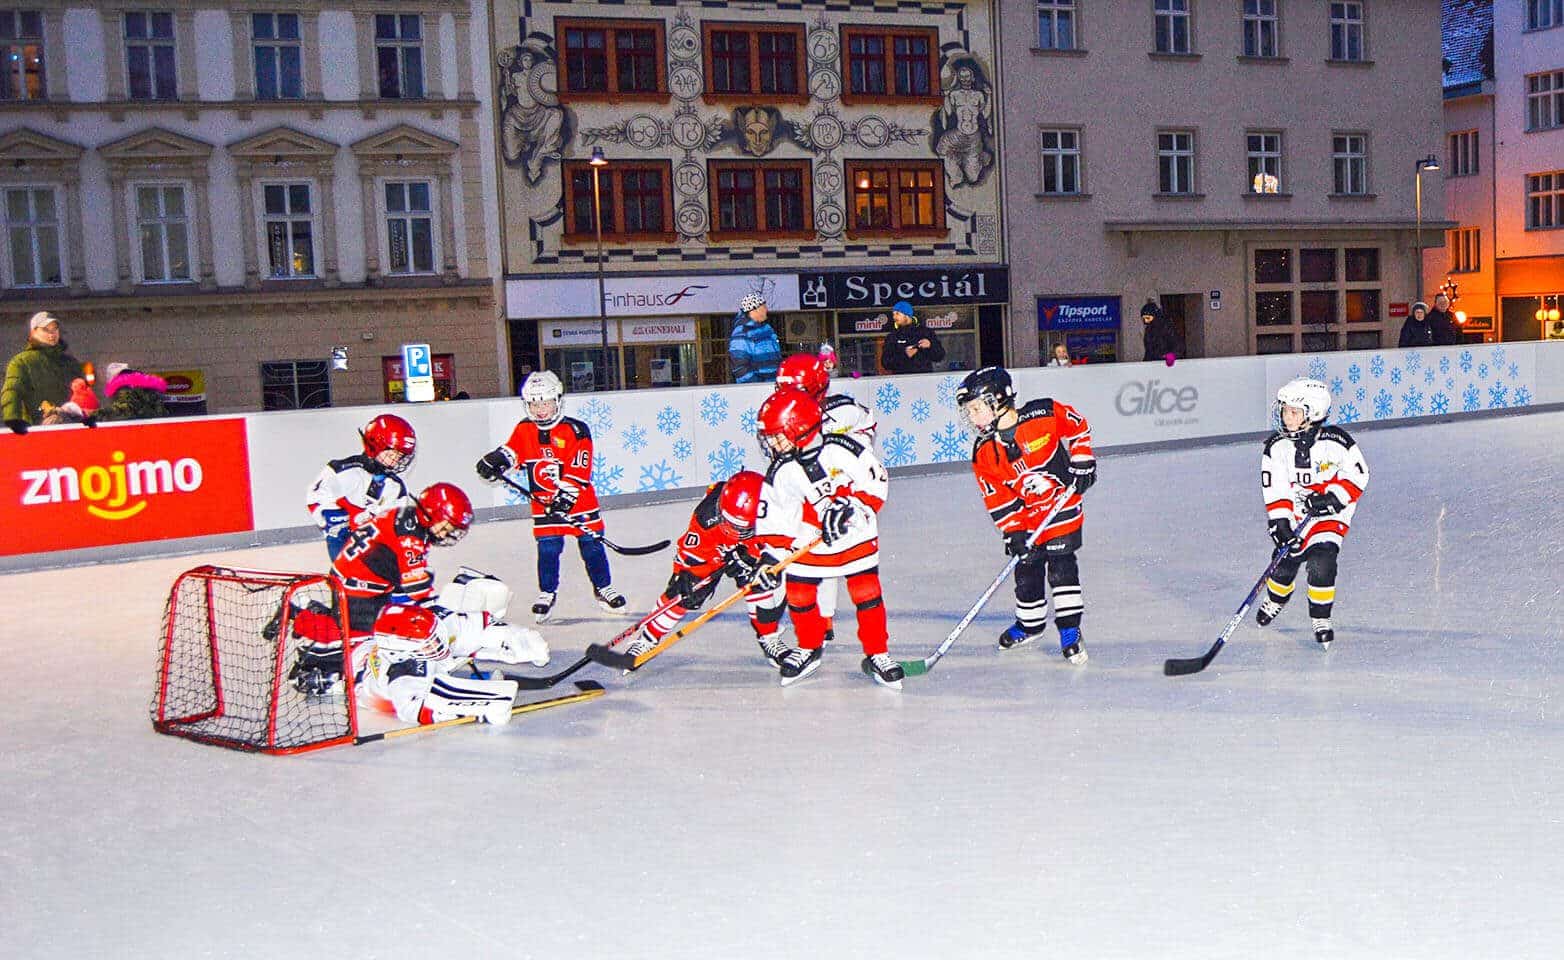 Children hockey match in city center on synthetic ice rink